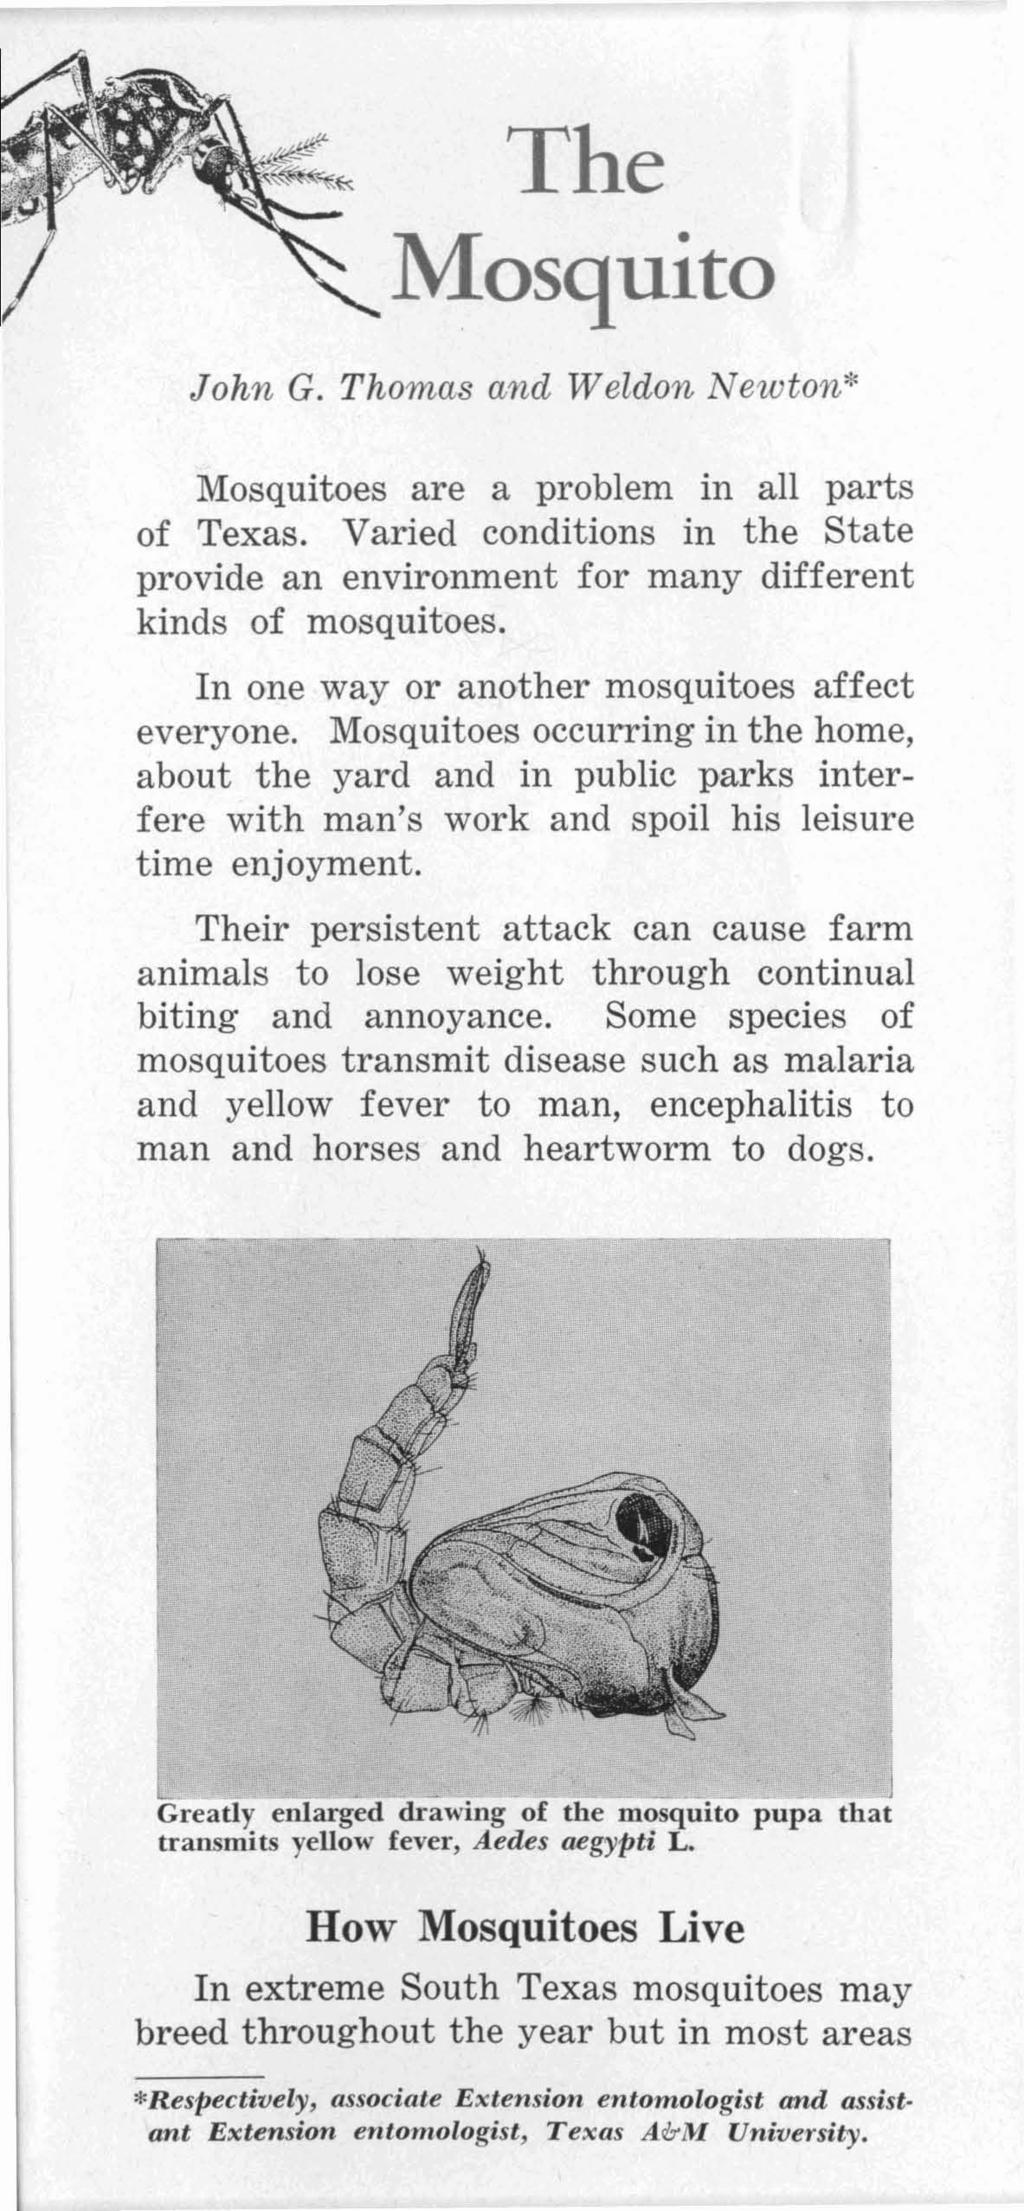 The Mosquito John G. Thomas and Weldon Newton* Mosquitoes are a problem in all parts of Texas. Varied conditions in the State provide an environment for many different kinds of mosquitoes.